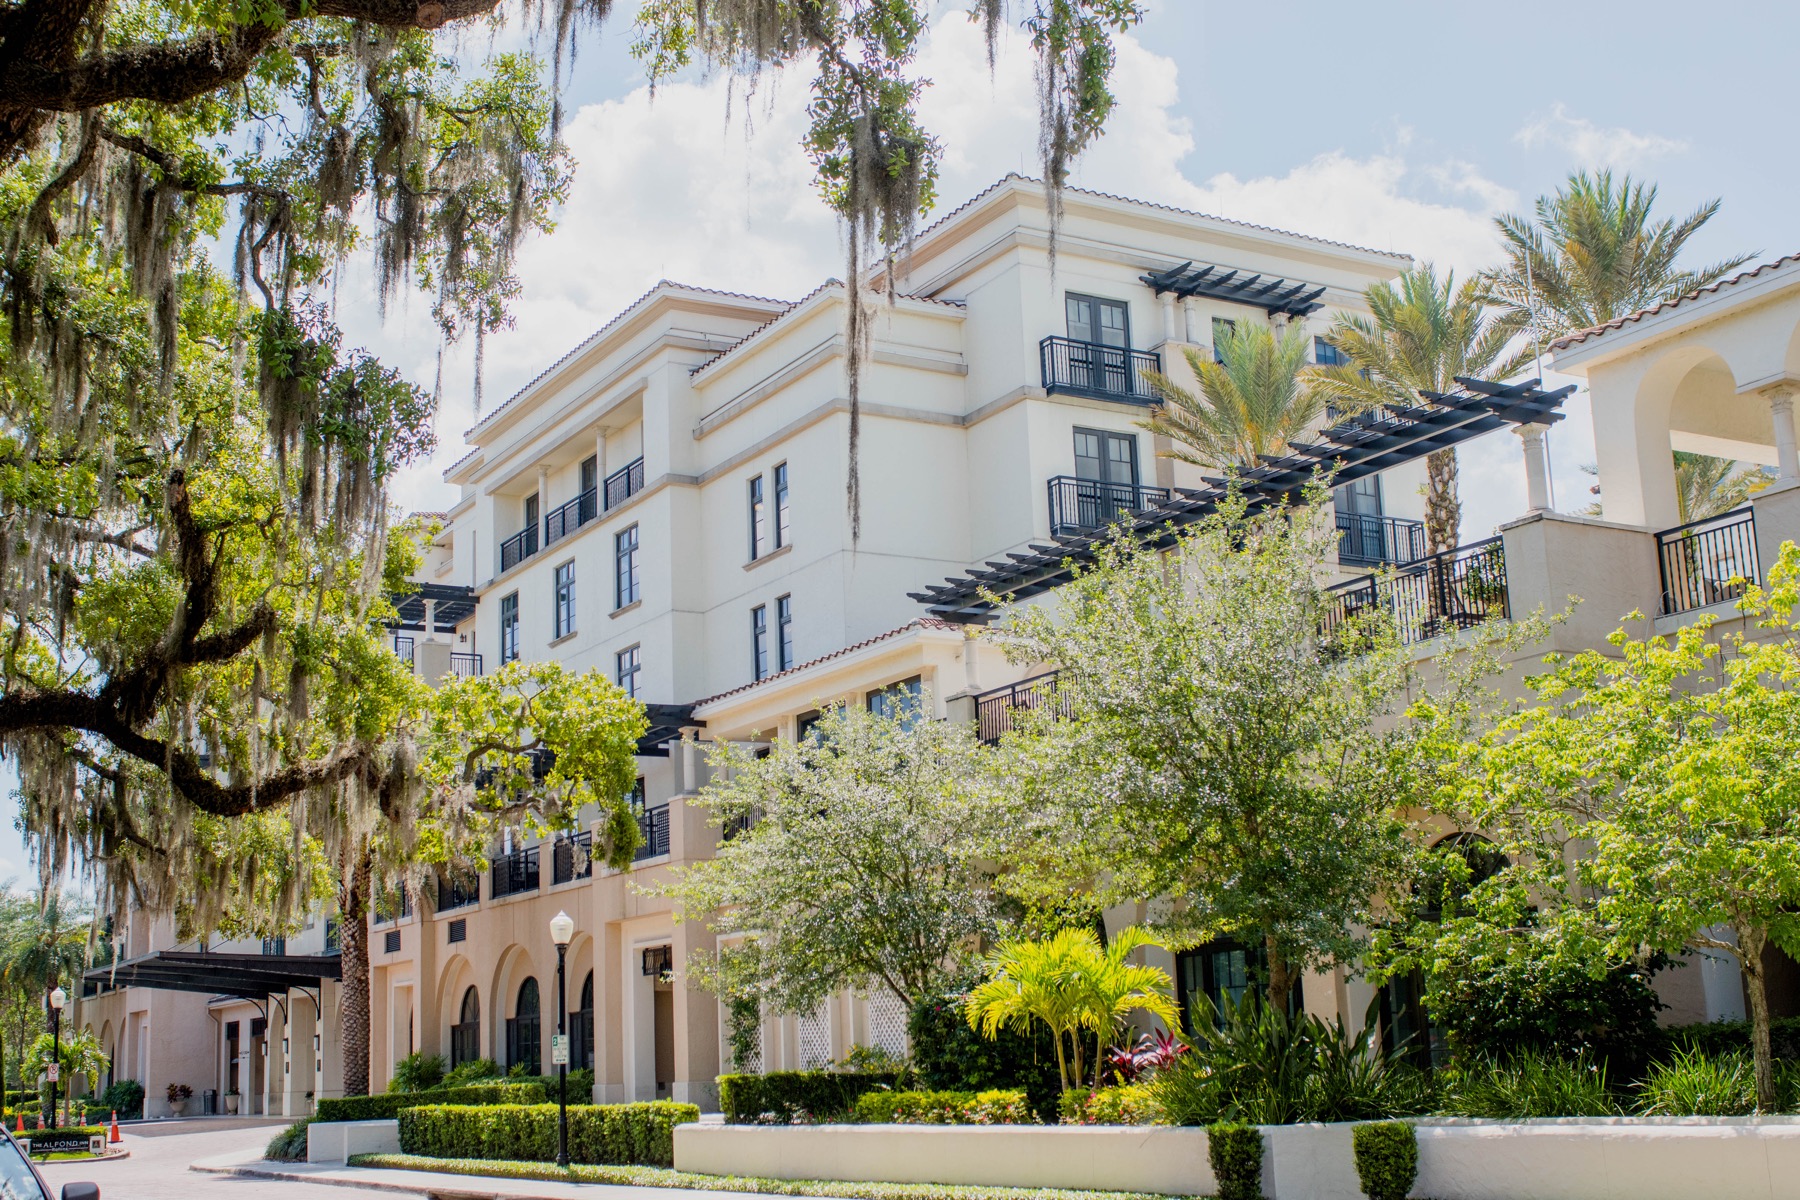 The Alfond Inn at Rollins College in Winter Park, Florida